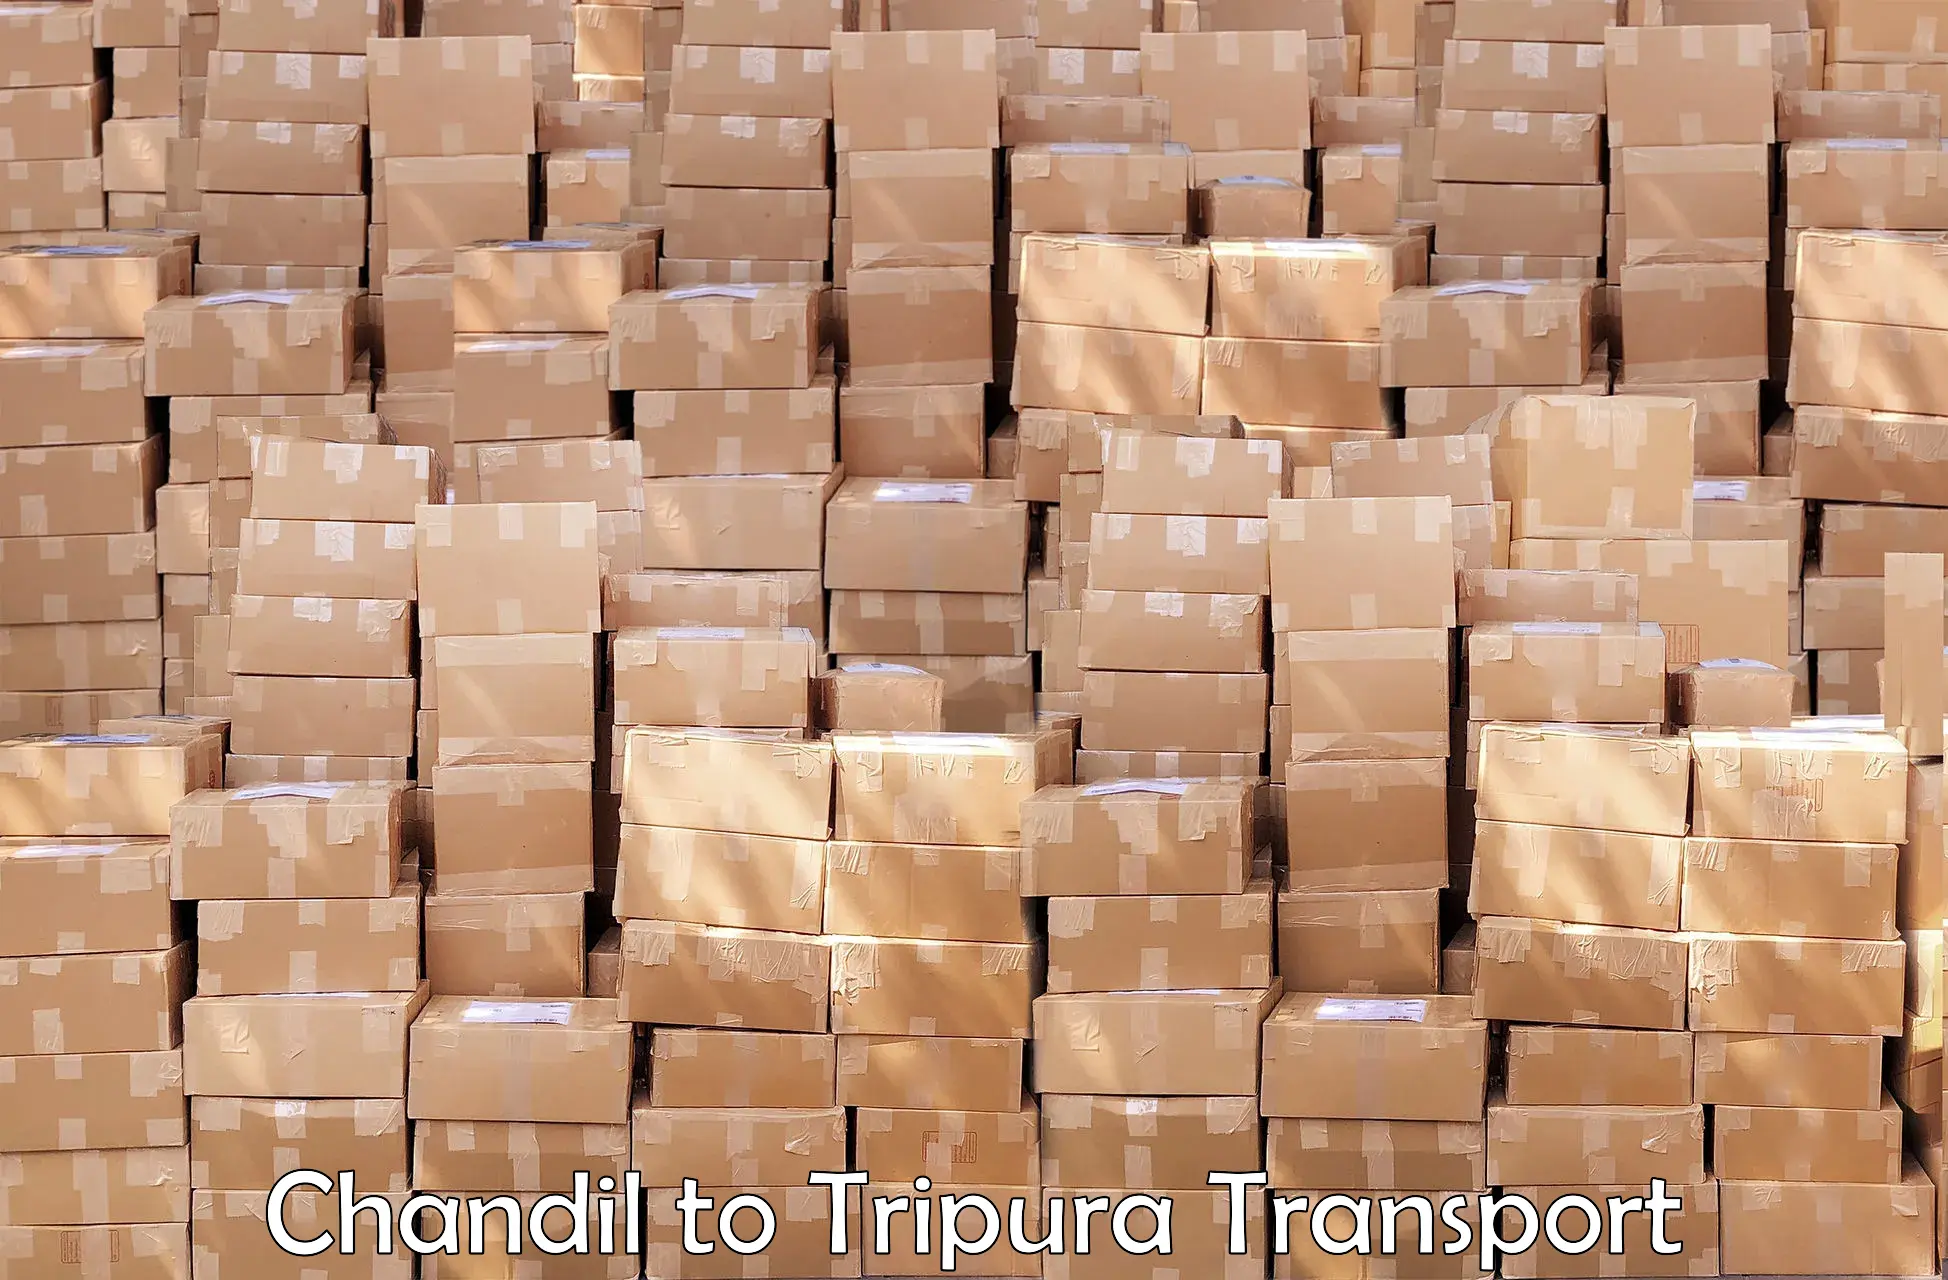 Transport shared services Chandil to Udaipur Tripura